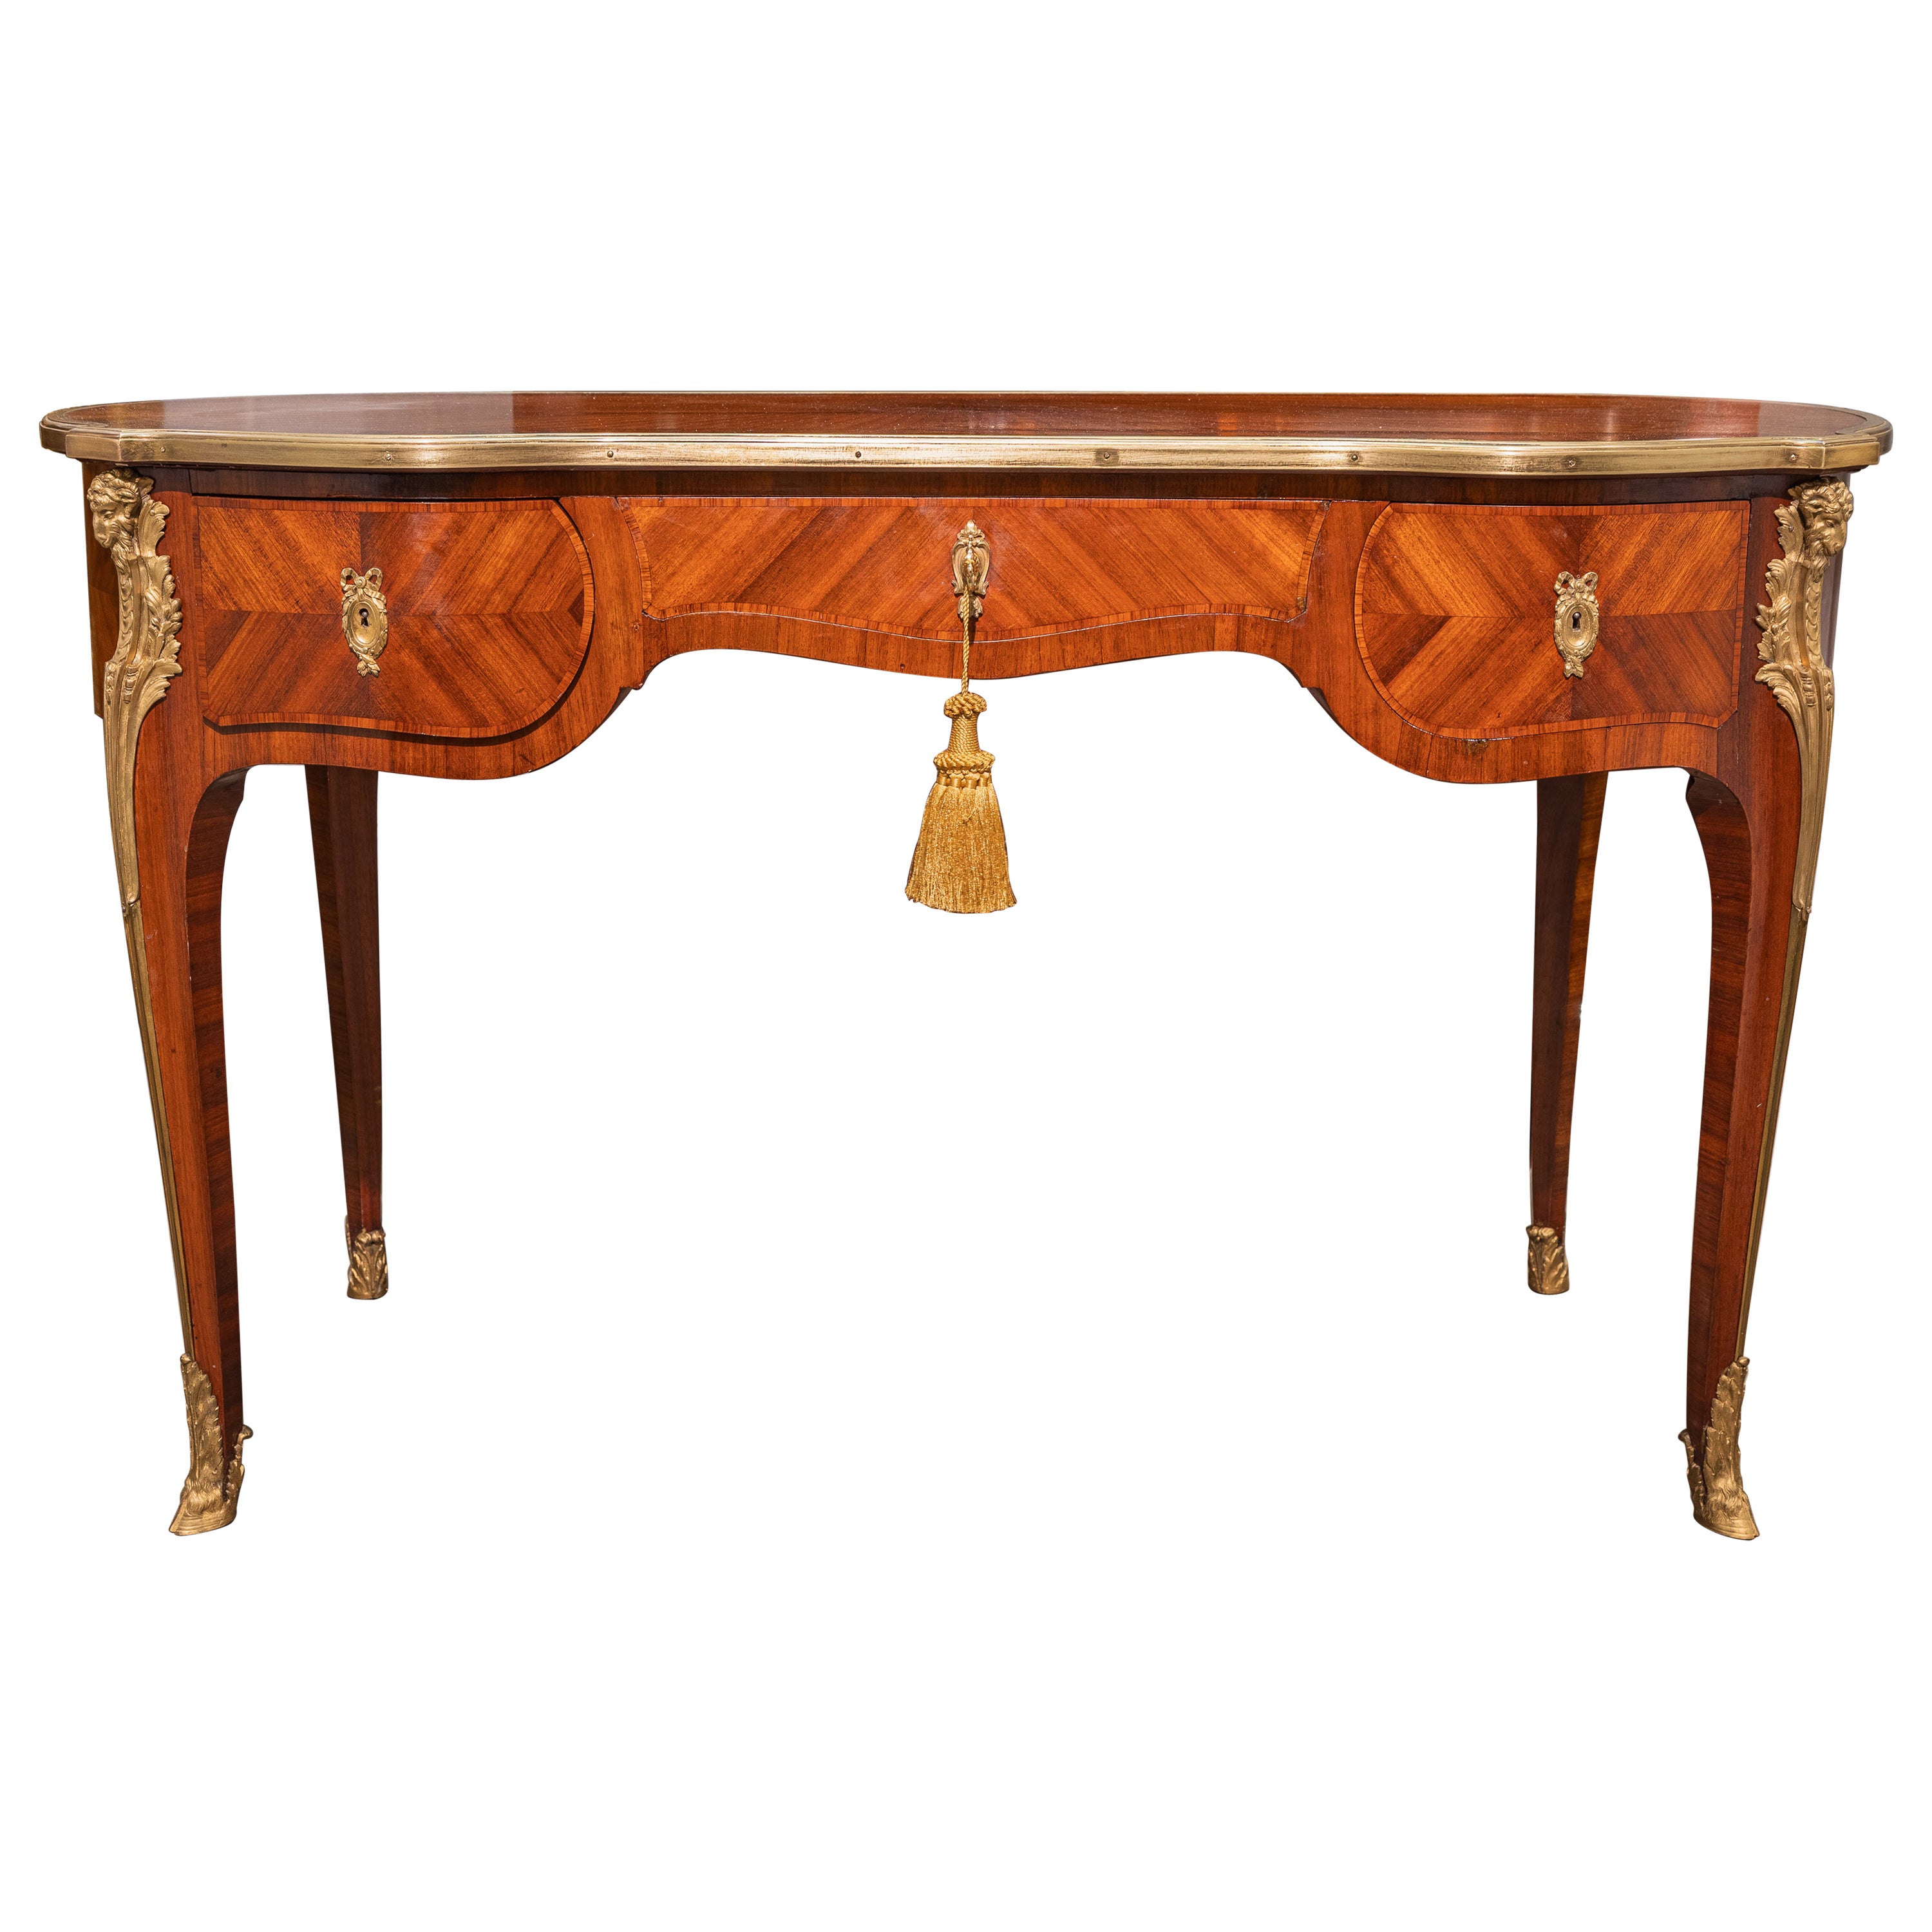 A fine 19th century French Louis XVI writing desk signed by Maison Krieger For Sale